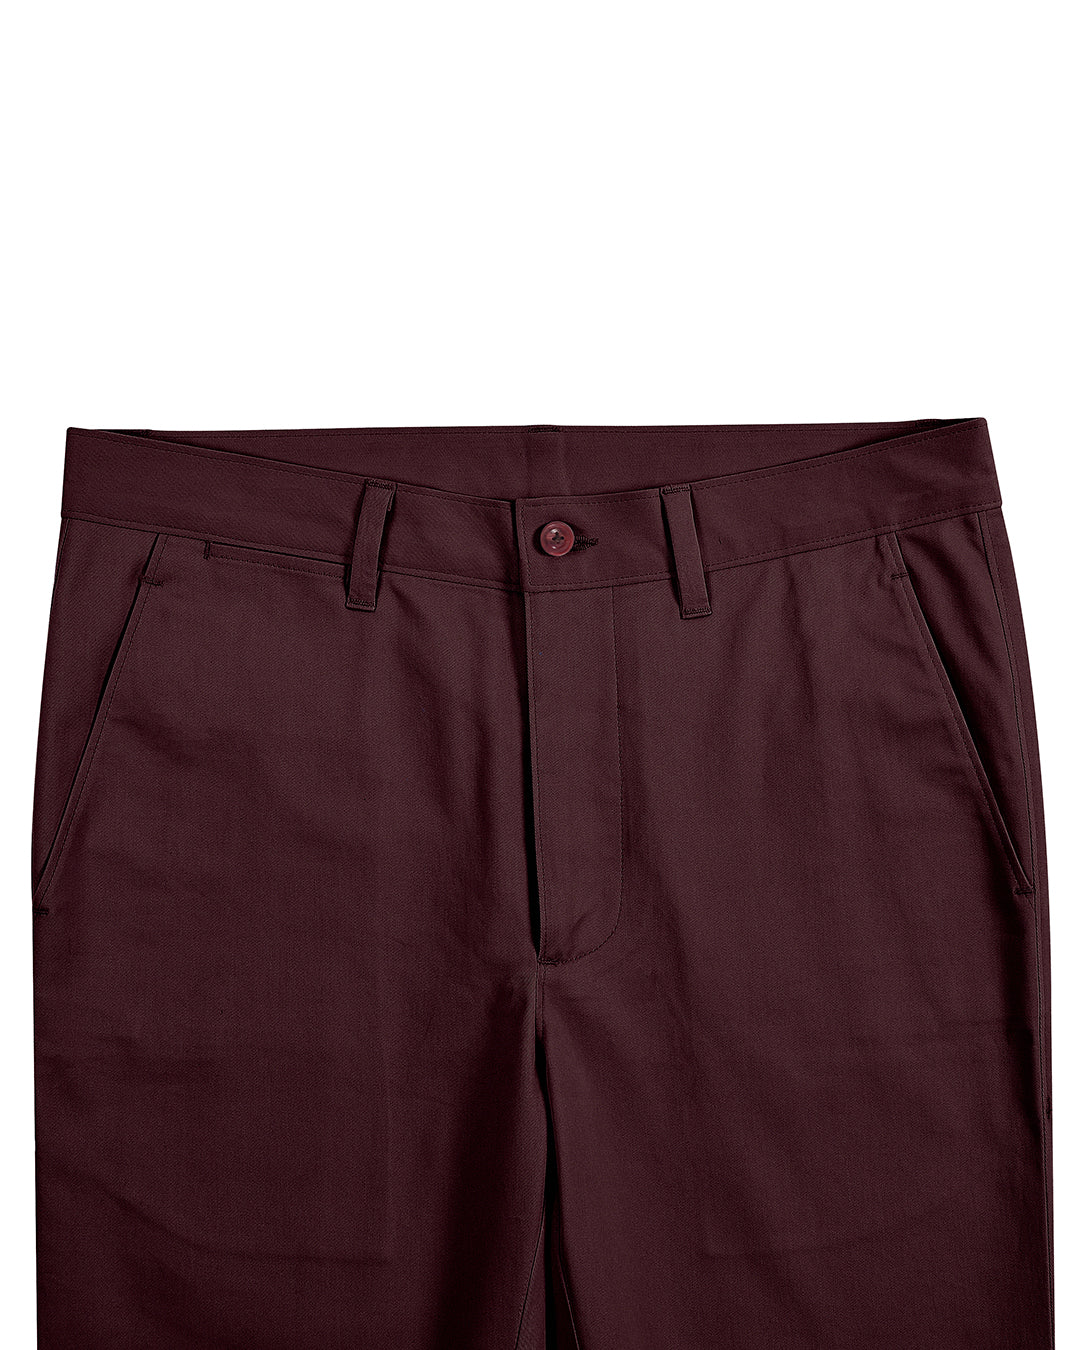 Front view of custom Genoa Chino pants for men by Luxire in plum